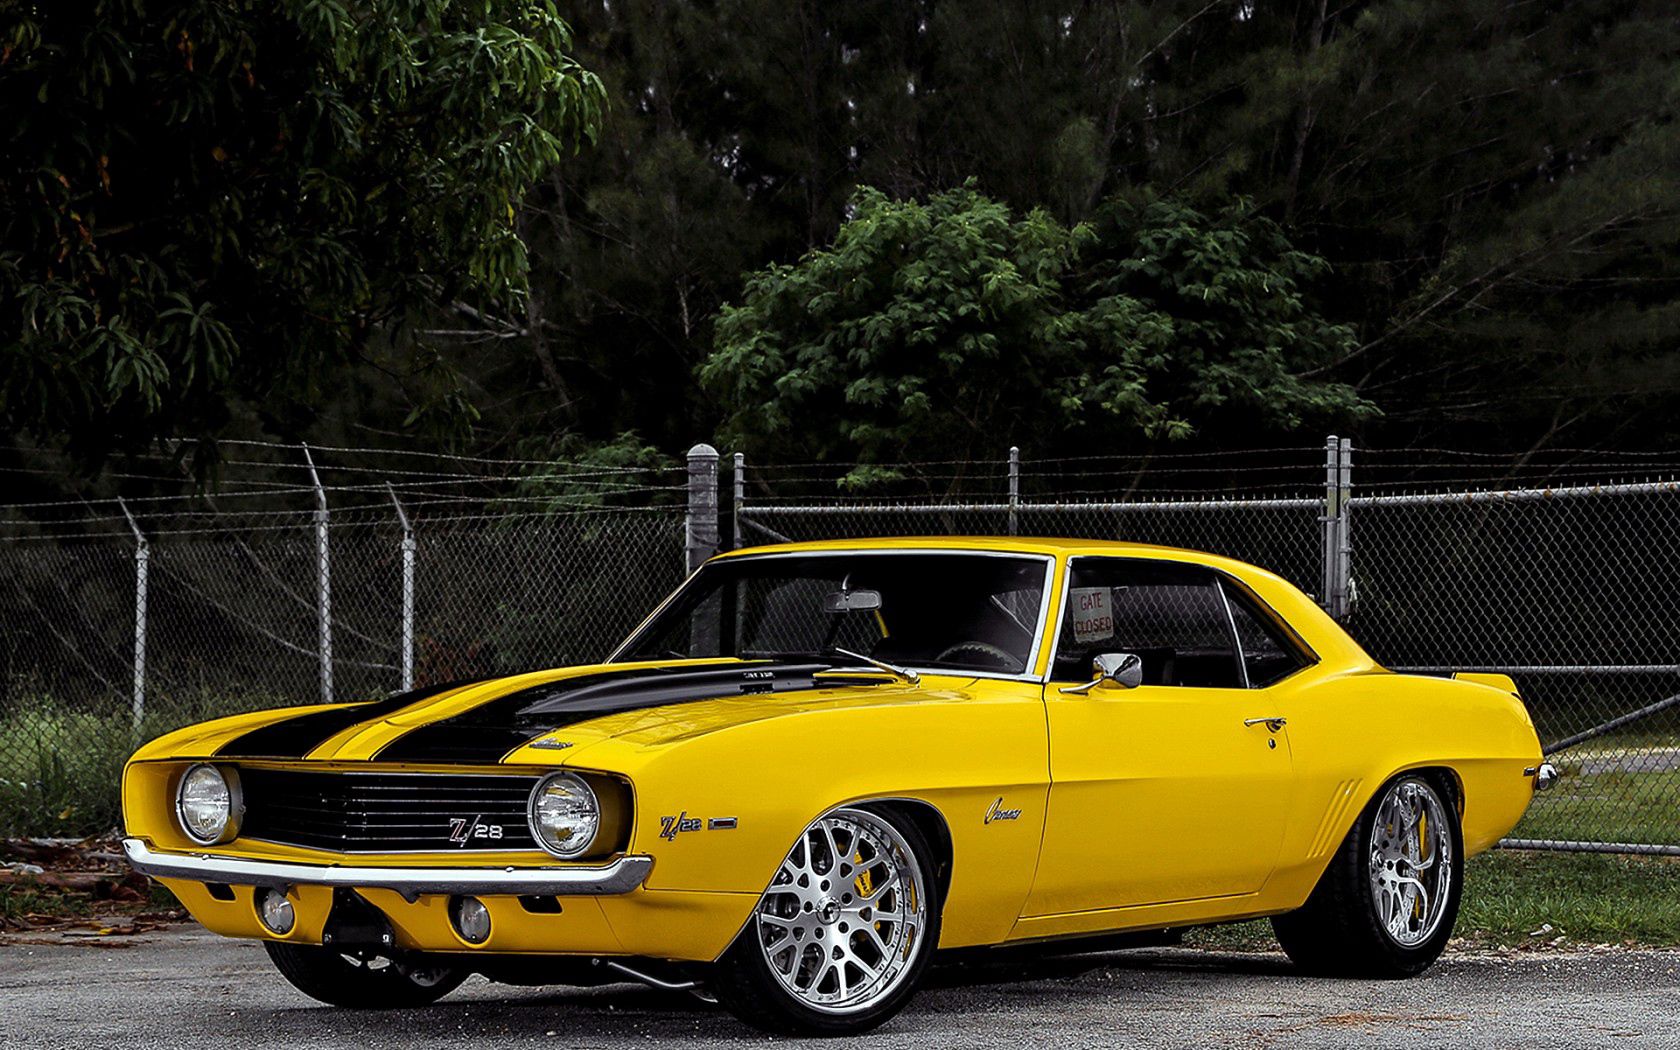 Download wallpaper 1680x1050 chevrolet, camaro, 1969, yellow, side view hd  background